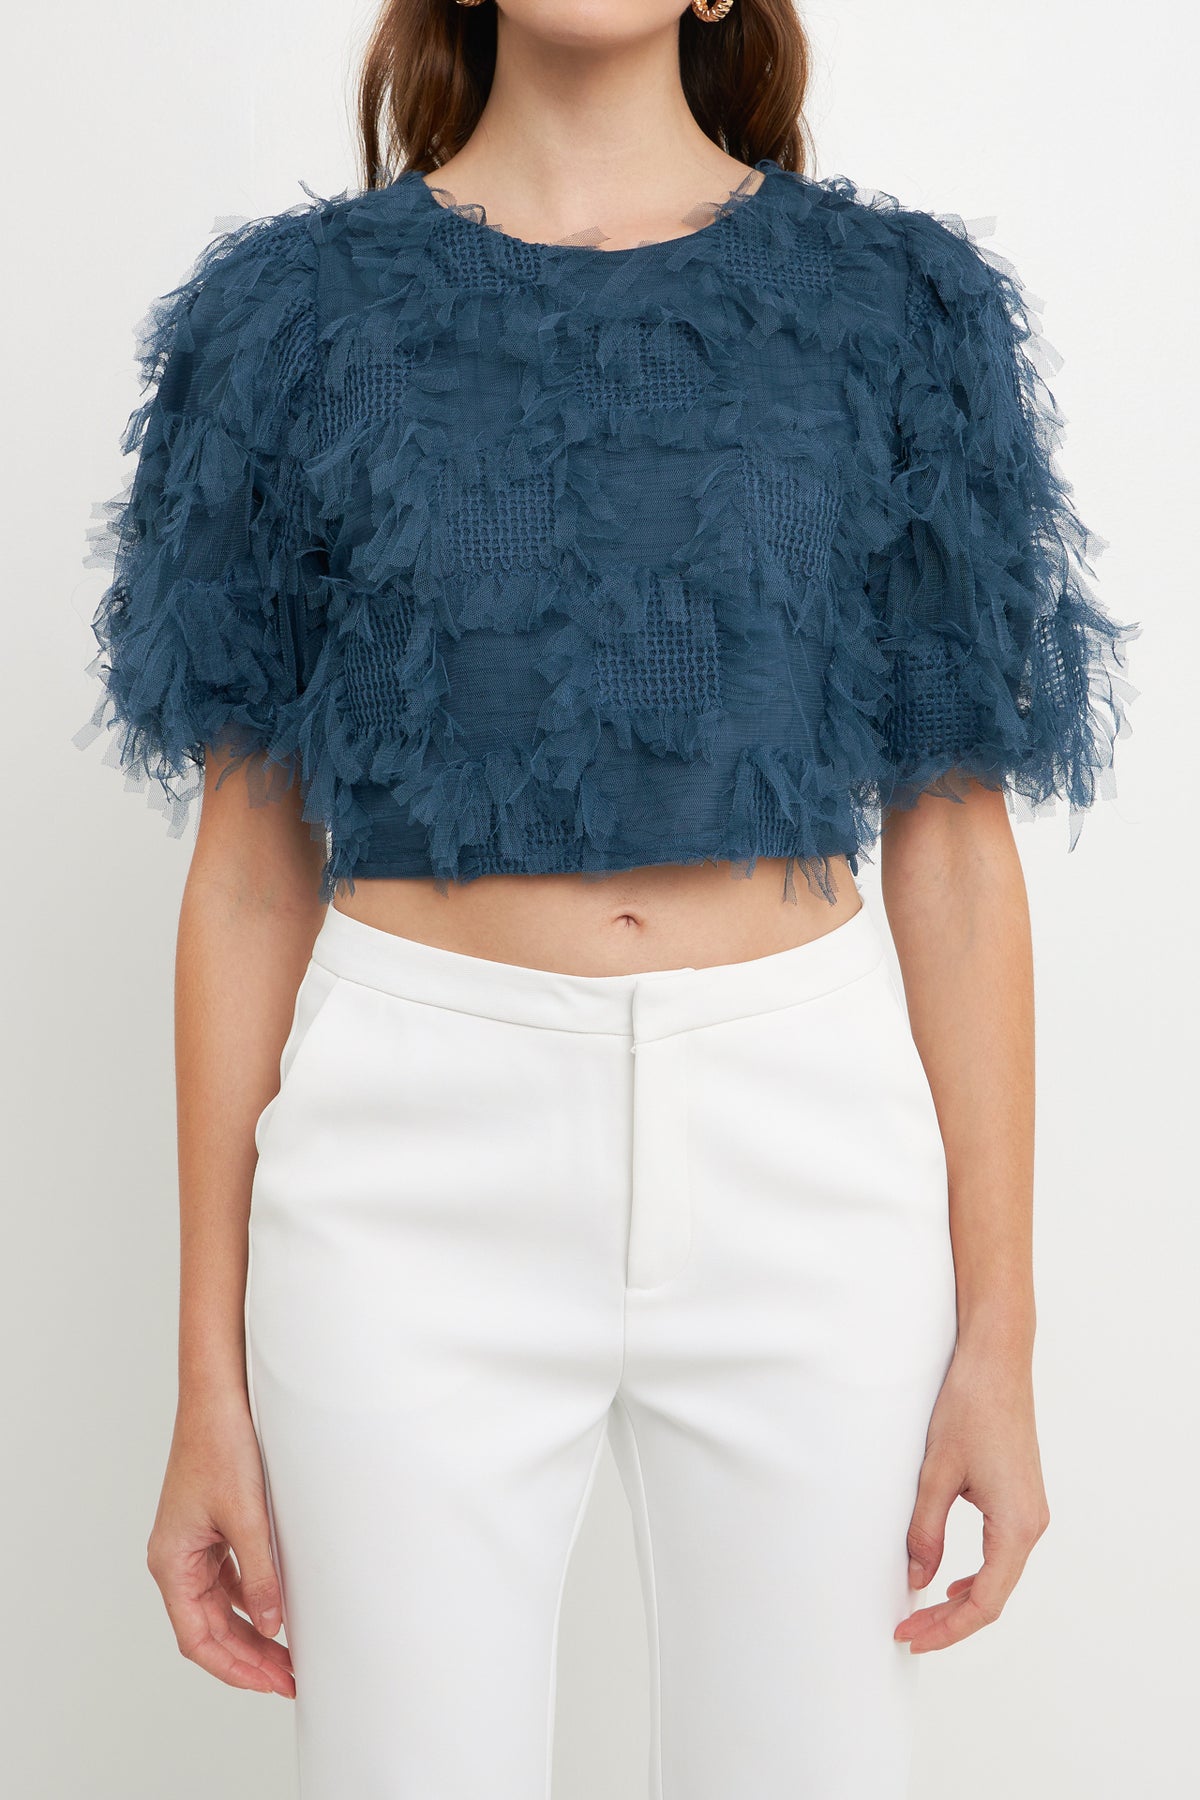 ENDLESS ROSE - Gridded Mesh Feathered Cropped Top - TOPS available at Objectrare